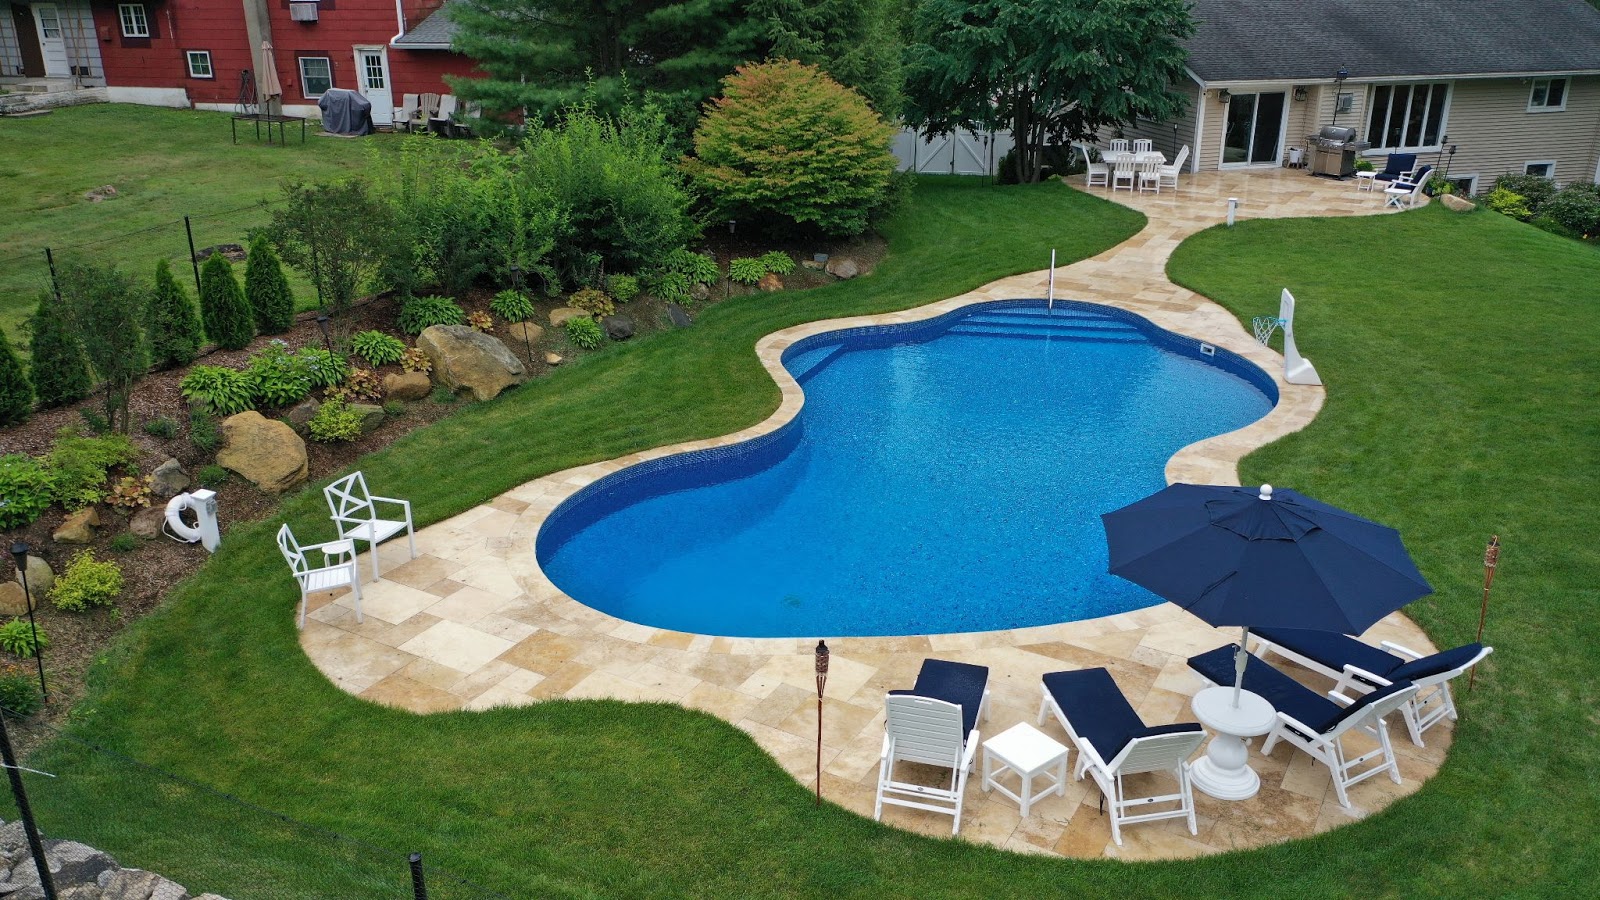 sample work of Neave Group pool contractor in Ulster NY - close up view of pool